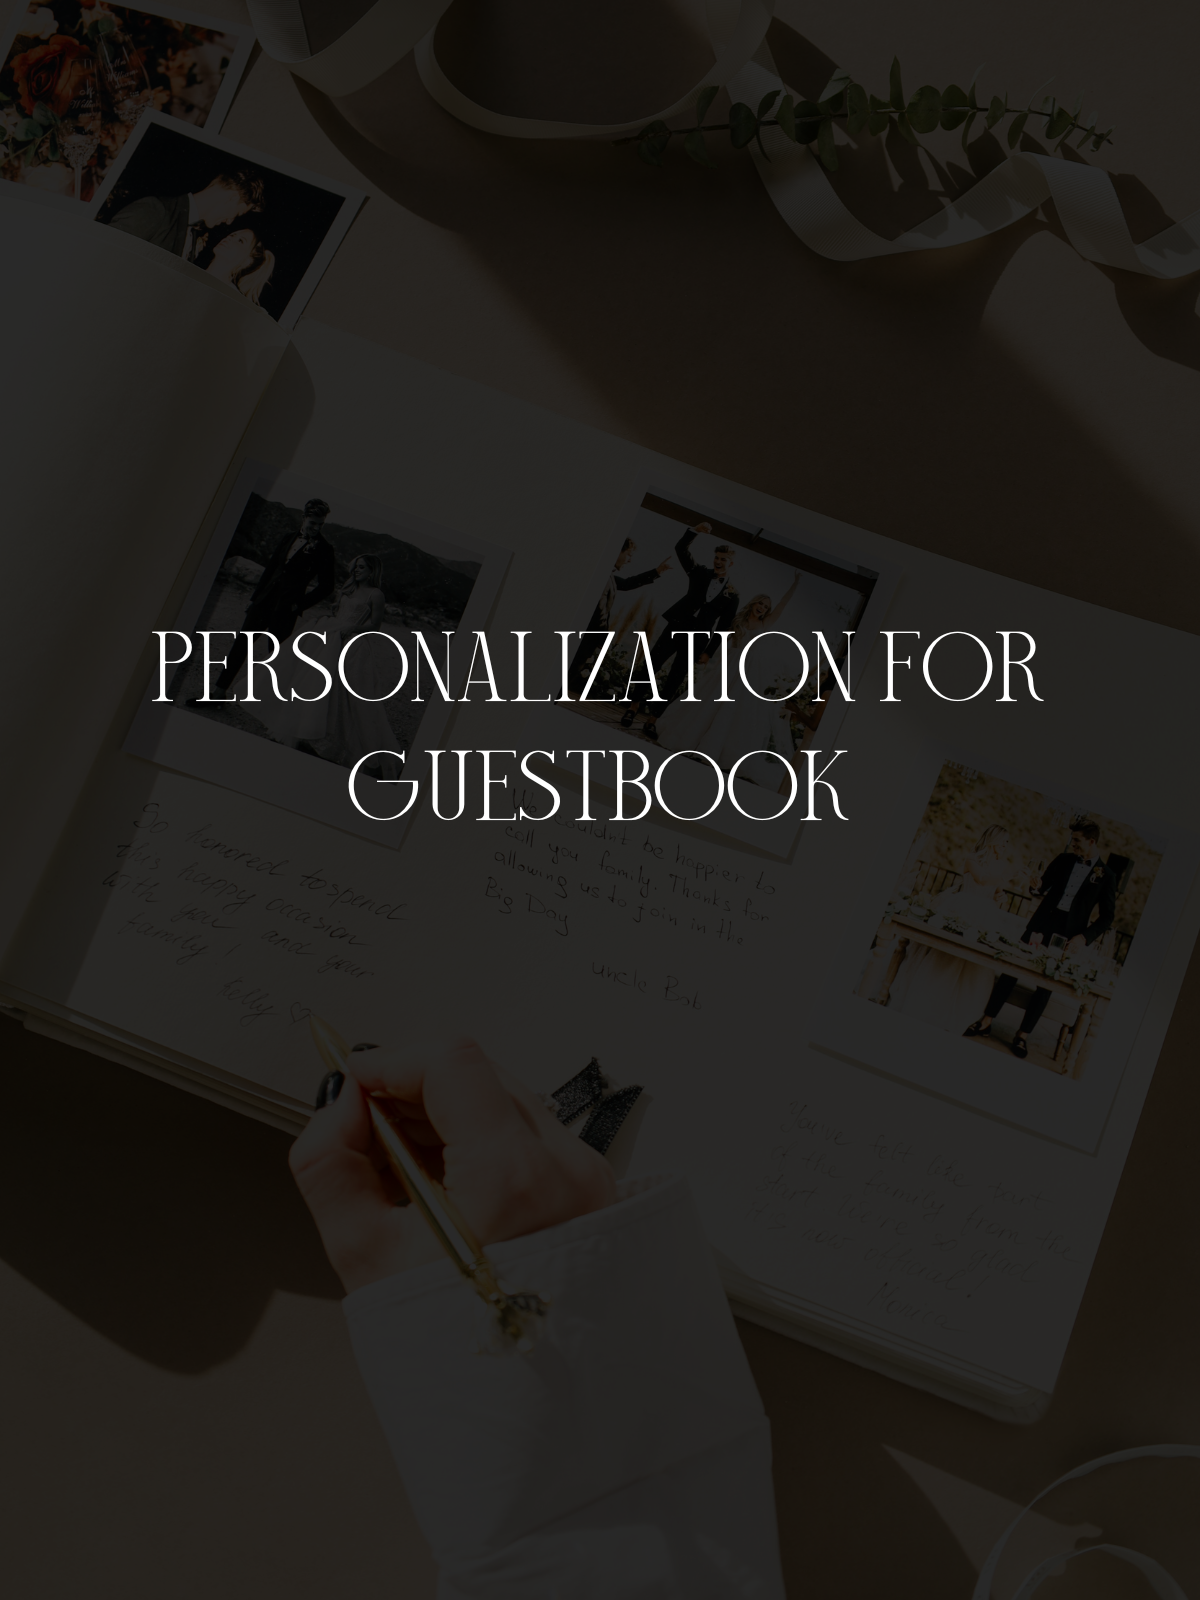 Personalization for guestbook